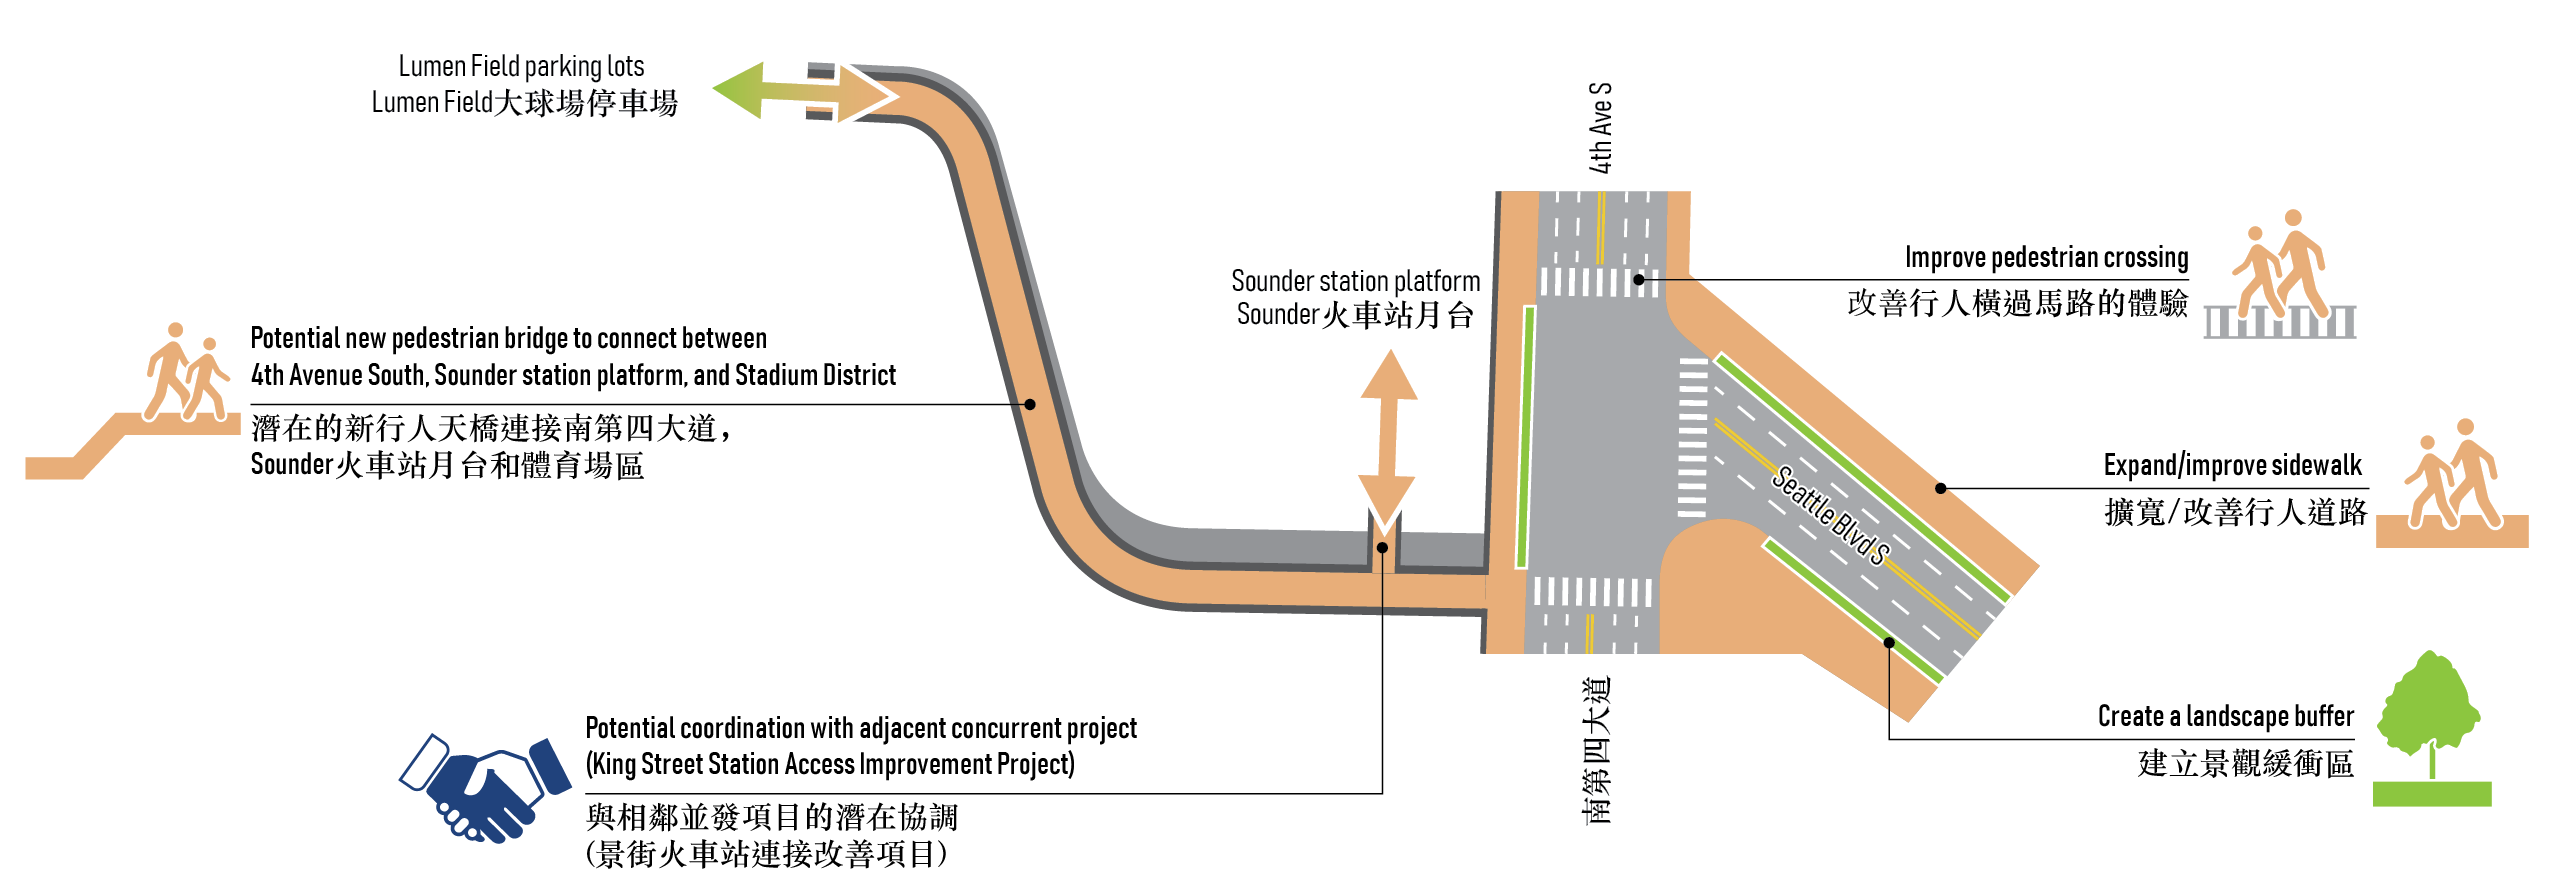 Illustration of the public space improvement option for the South Dearborn Street and surrounding intersections focus area. The priority for this improvement for the focus area would be to build a new pedestrian bridge to connect 4th Avenue South, Sounder station platform, and the Stadium district. The pedestrian bridge, shown in orange with arrows indicating two-way flow of traffic, would cross the existing BNSF train tracks just south of the 4th Avenue and Seattle Boulevard South intersection. This option would also improve pedestrian crossing near the intersection of 4th and Dearborn, expand sidewalks along Seattle Boulevard South and 4th Avenue, and create a landscape buffer on both sides of Seattle Boulevard South.